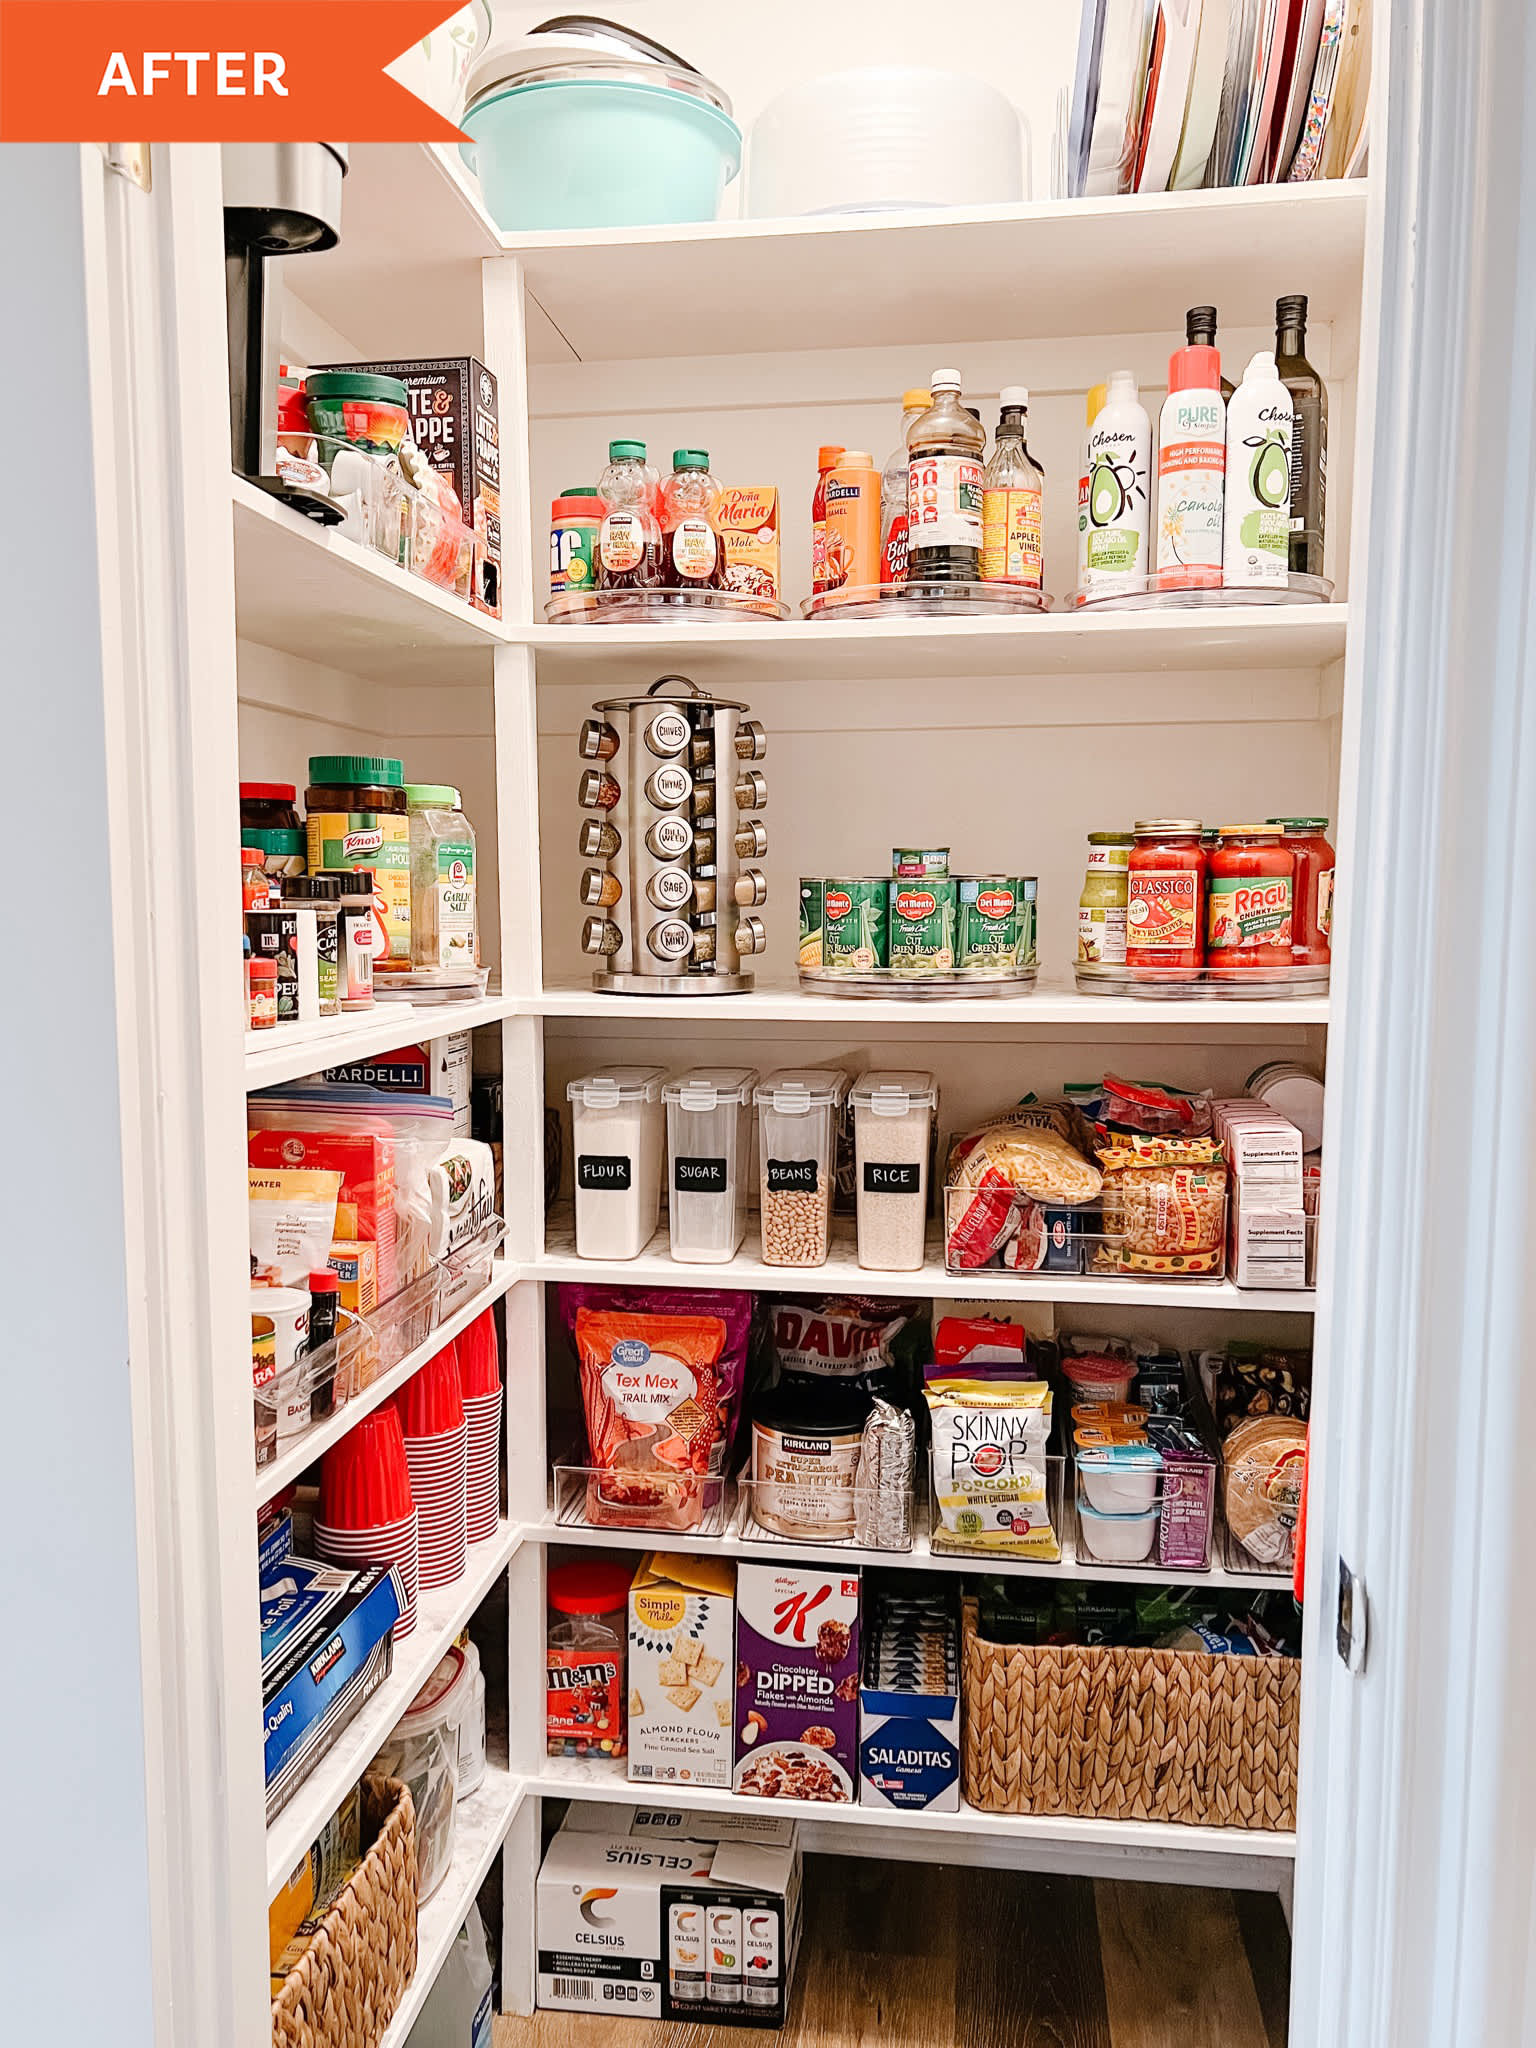 https://cdn.apartmenttherapy.info/image/upload/v1661788899/at/organize-clean/before-after/Bianca%20Delatorre%20Pantry/BiancaDelatorre_111372800_80425818E72A4E76B29228A633103FA9.jpg